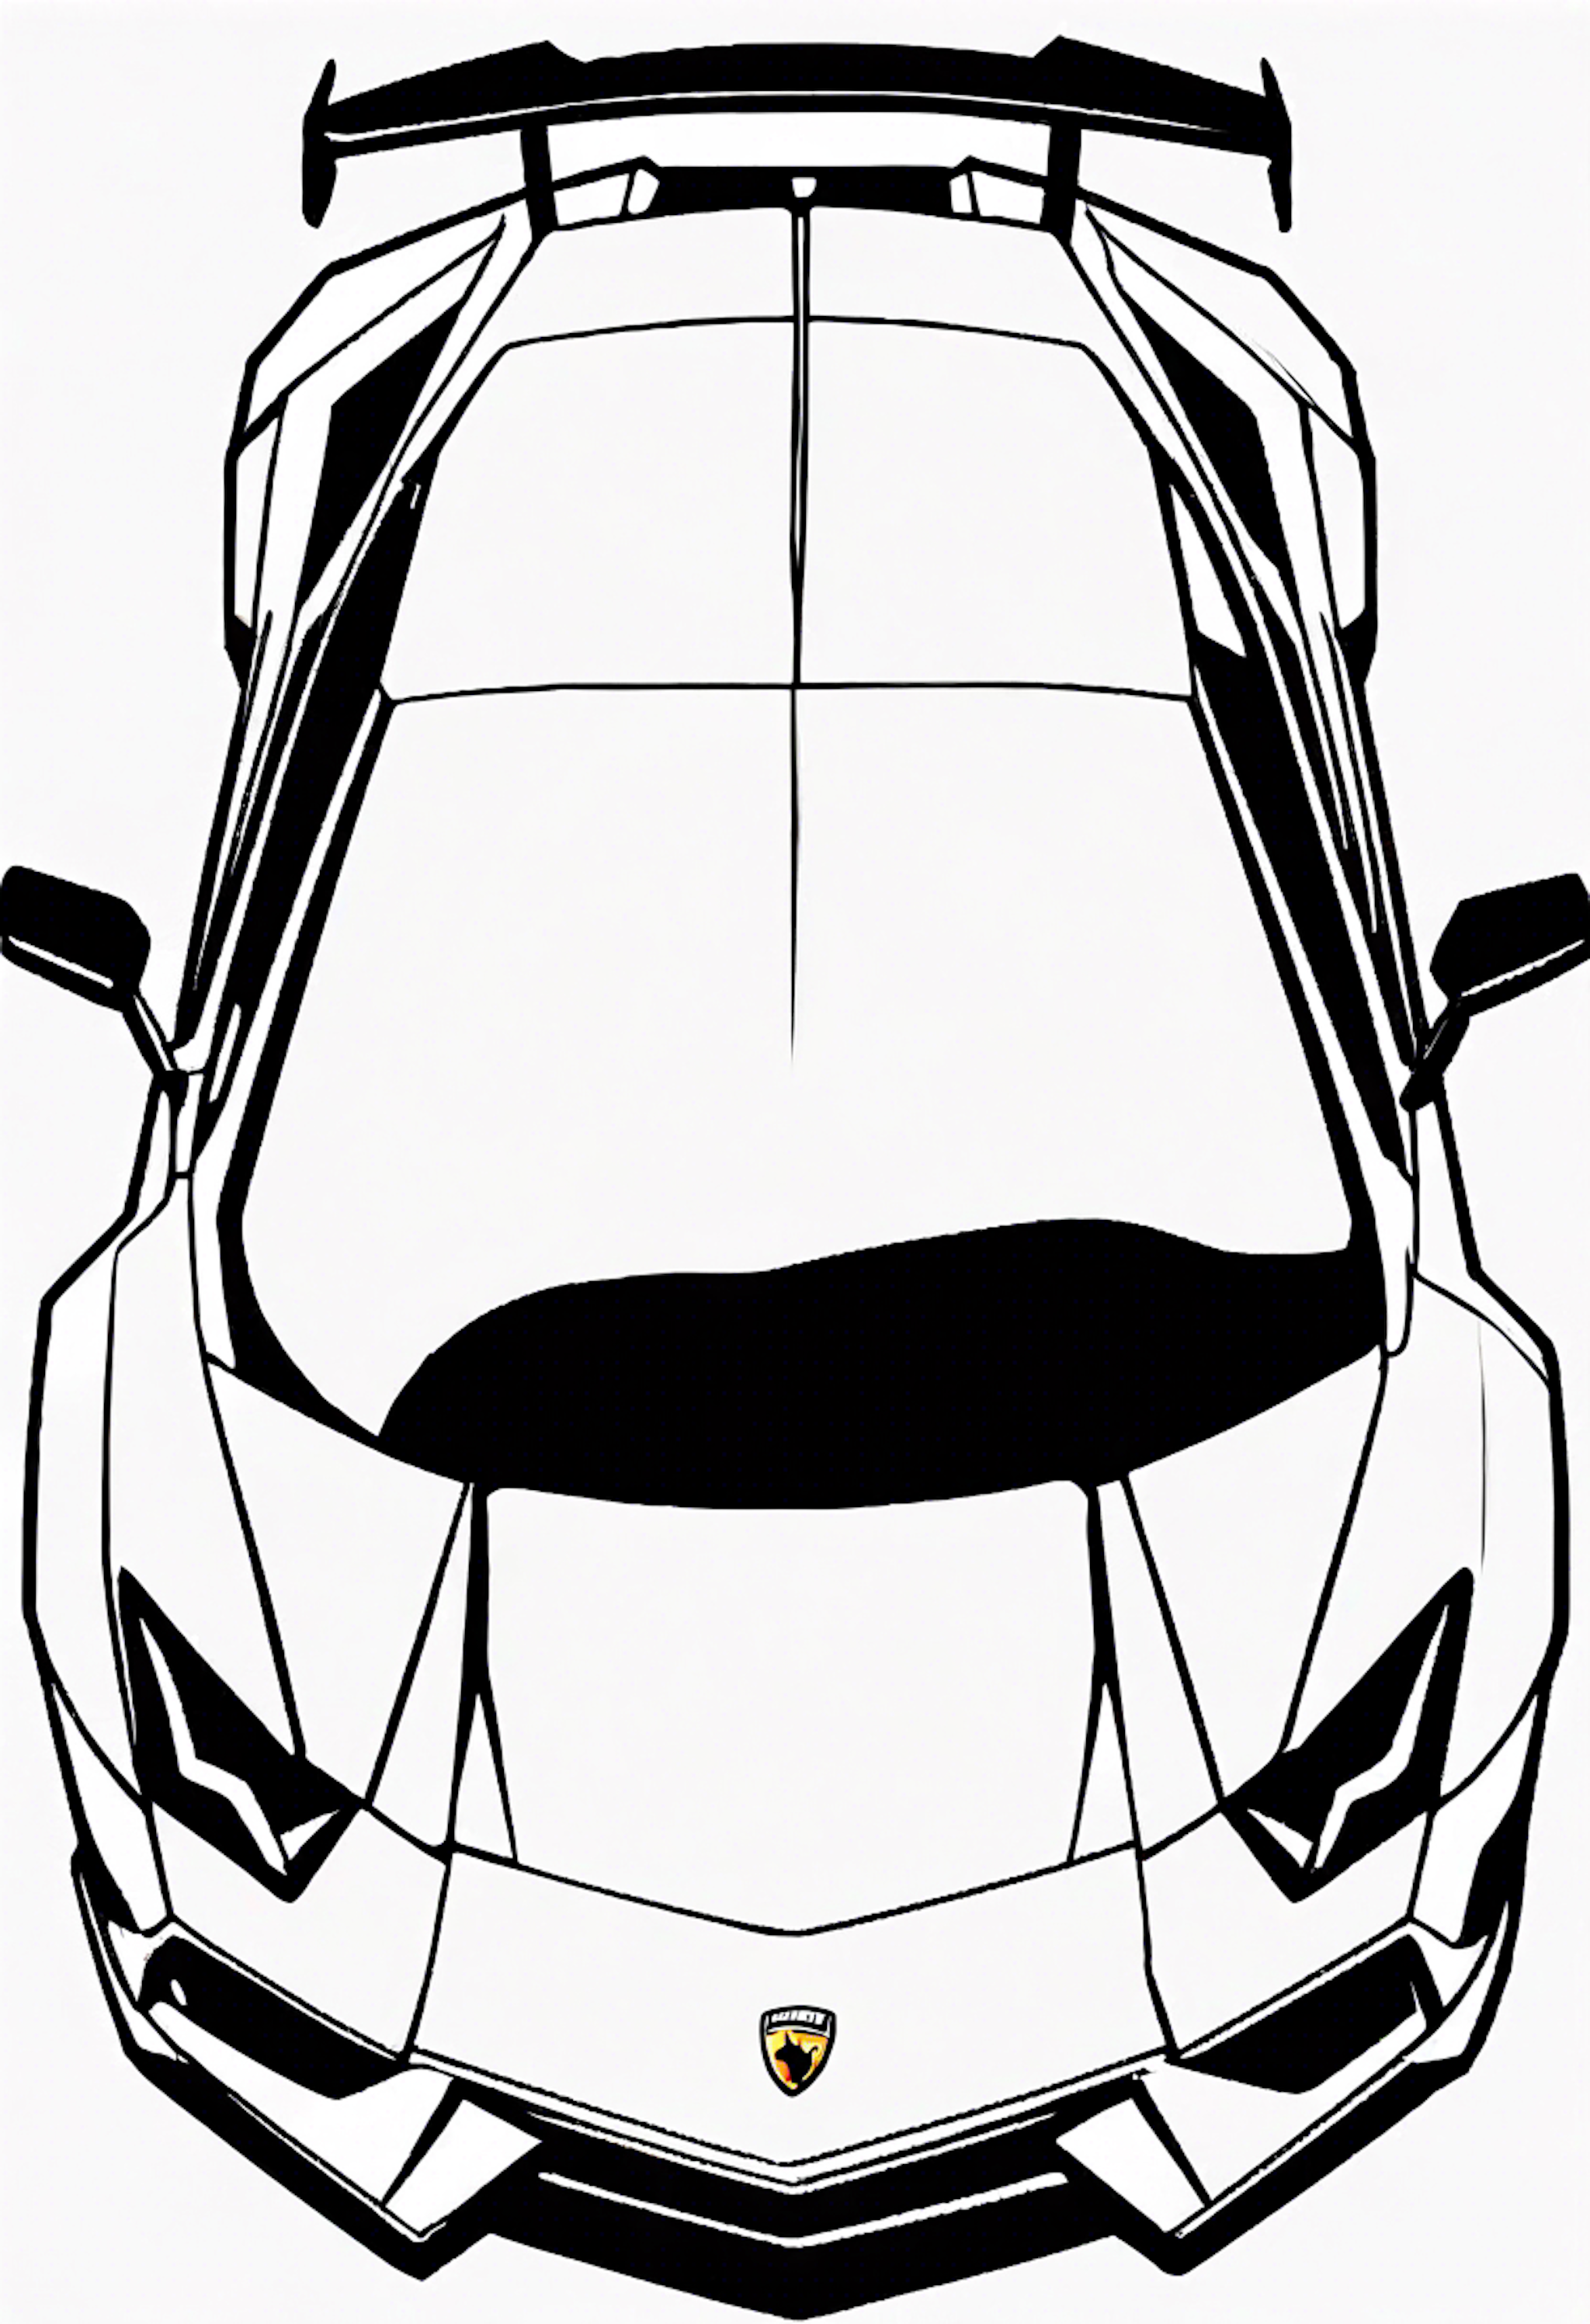 A coloring page for 1 Lamborghini coloring pages